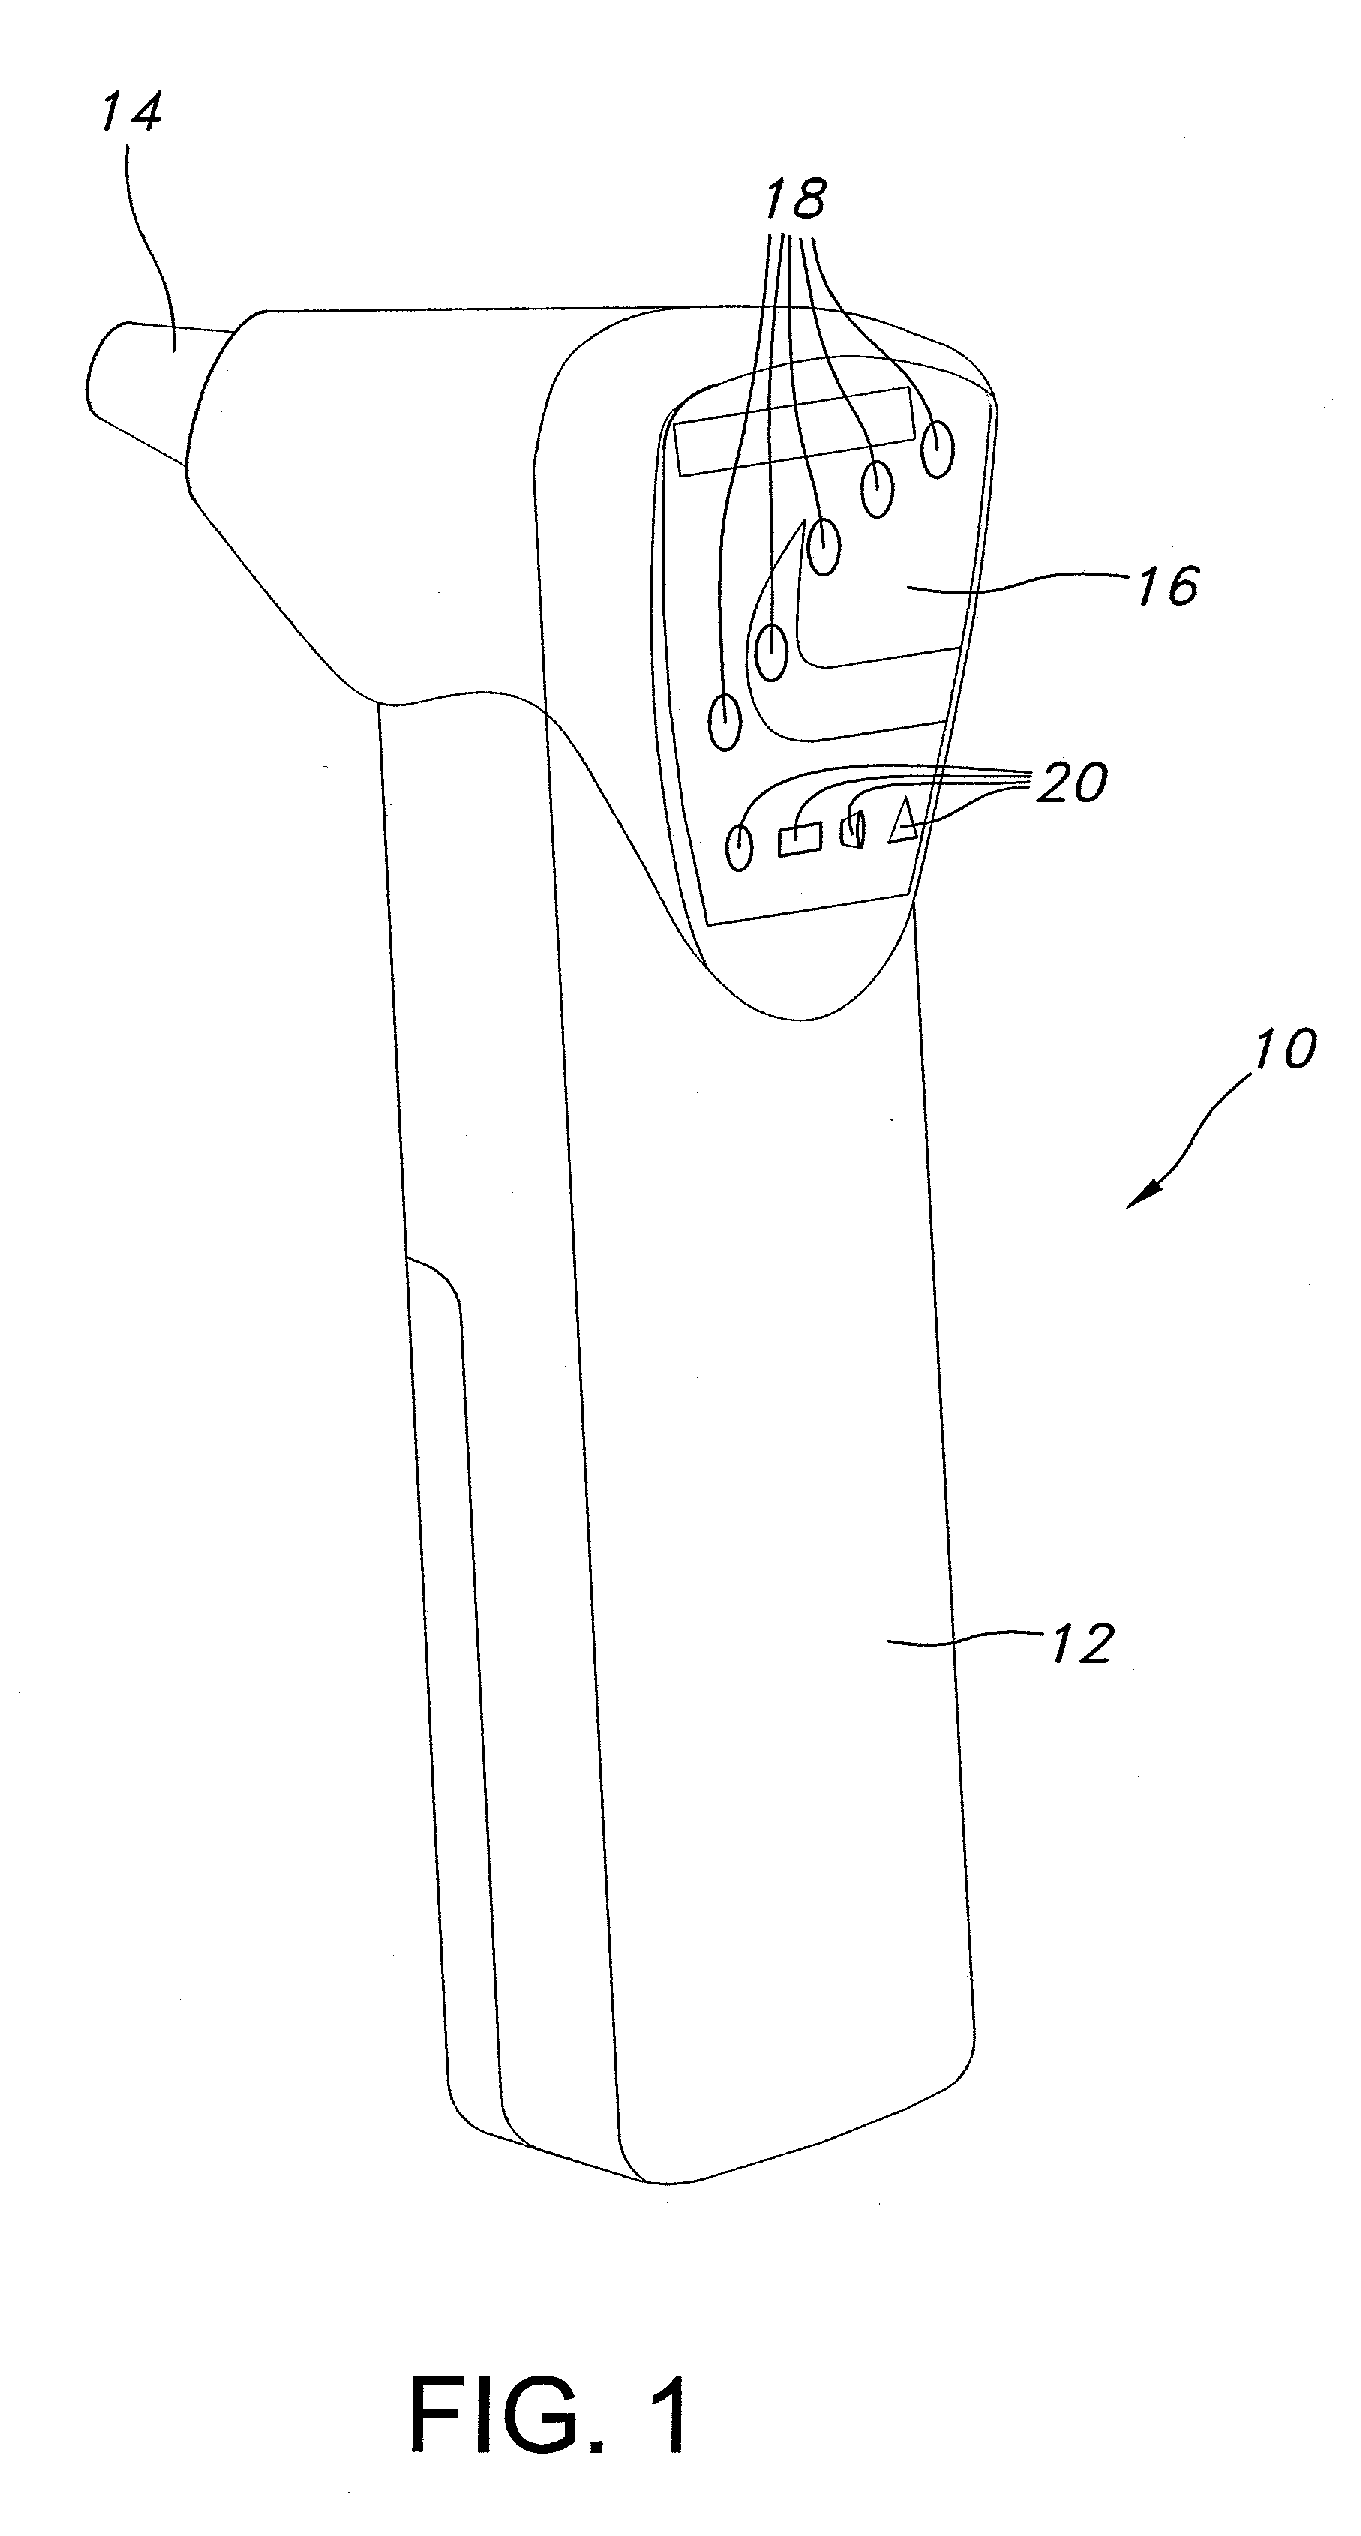 Acoustic reflectometry instrument and method